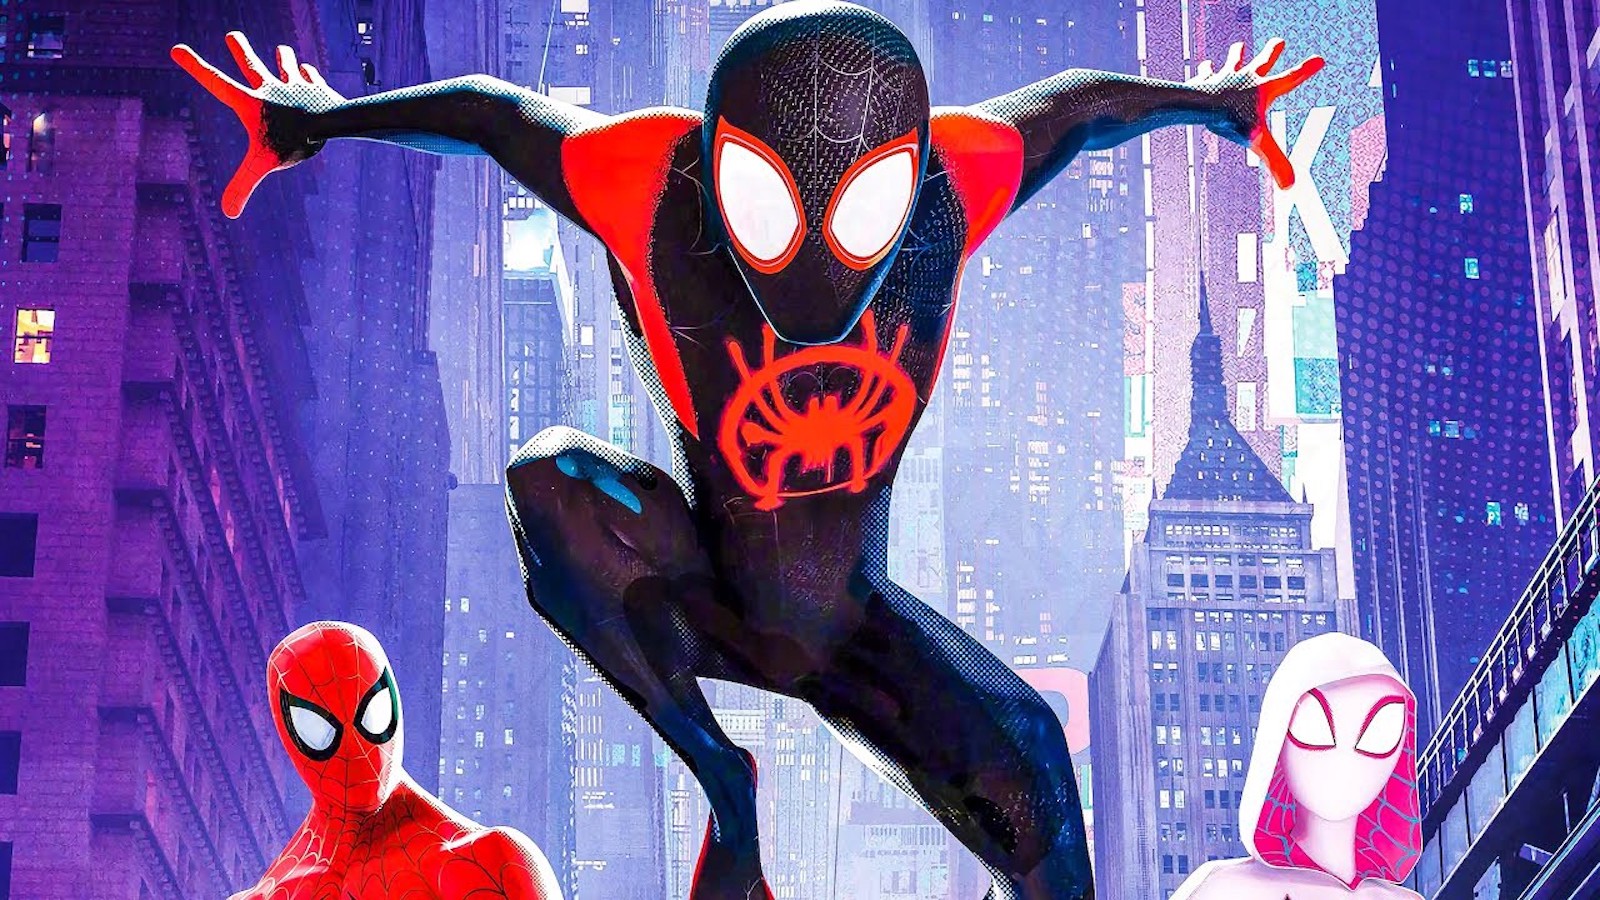 Spider-Man: Across the Spider-Verse Character Posters Show Lots of Spider -People